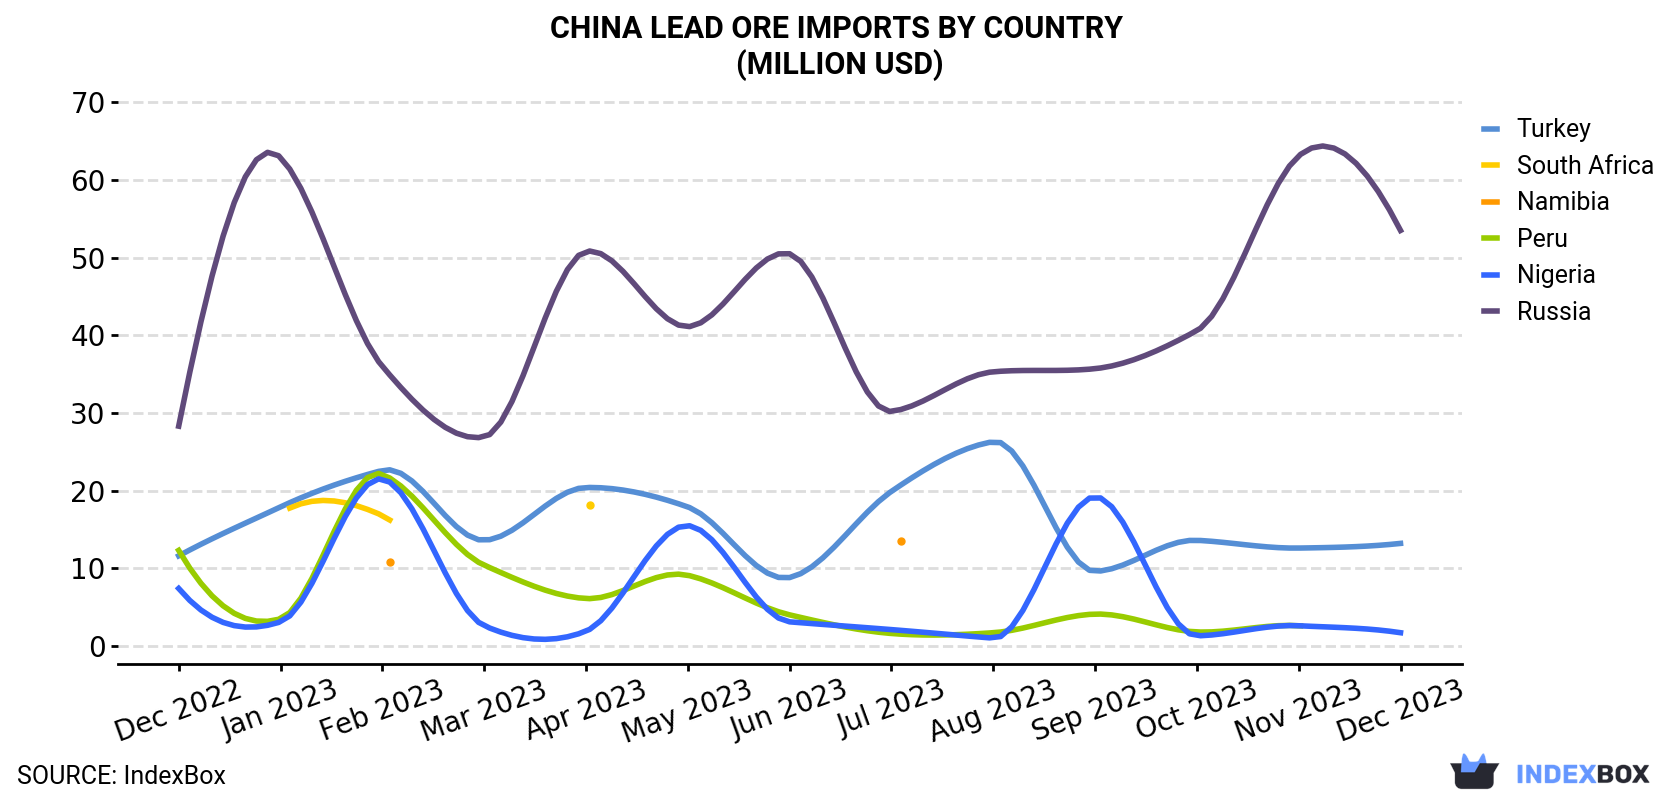 China Lead Ore Imports By Country (Million USD)